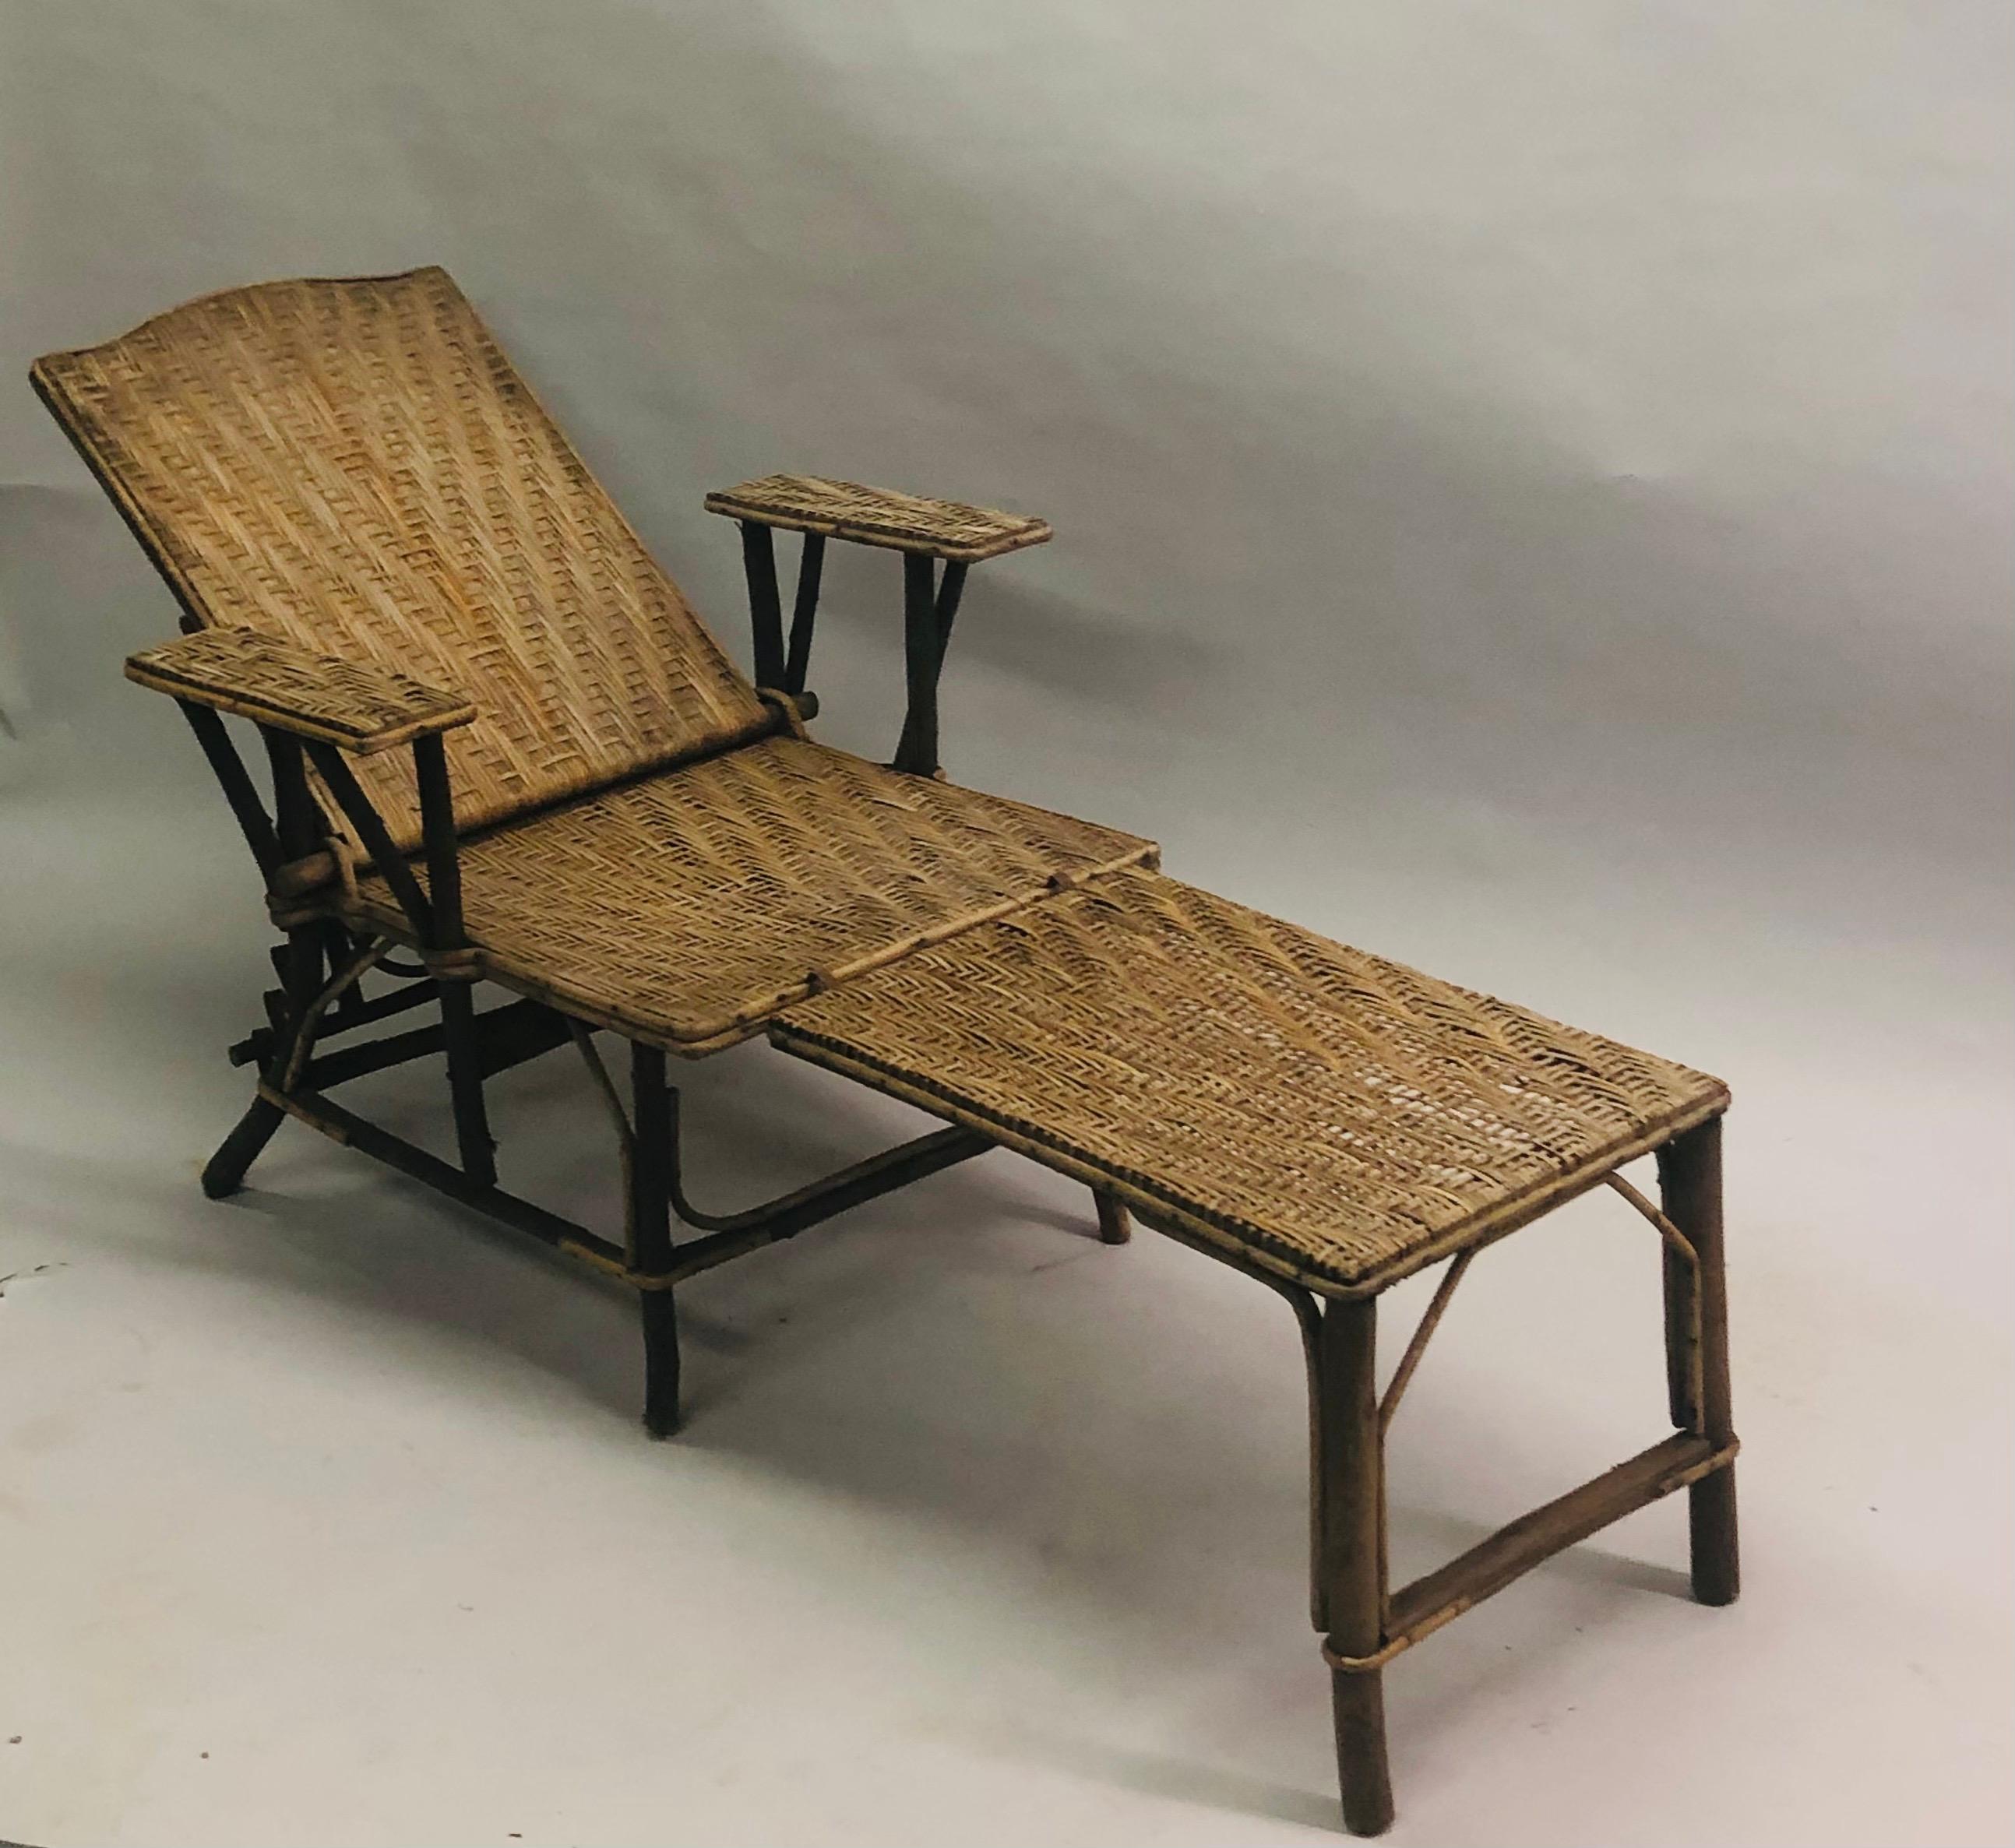 Authentic French Art Deco Chaise Lounge in Bamboo and Rattan circa 1920 with rattan woven in a cubist form and presenting a chic, slender profile. A charming atmospheric piece that add depth and authenticity to any room. The chair and ottoman attach